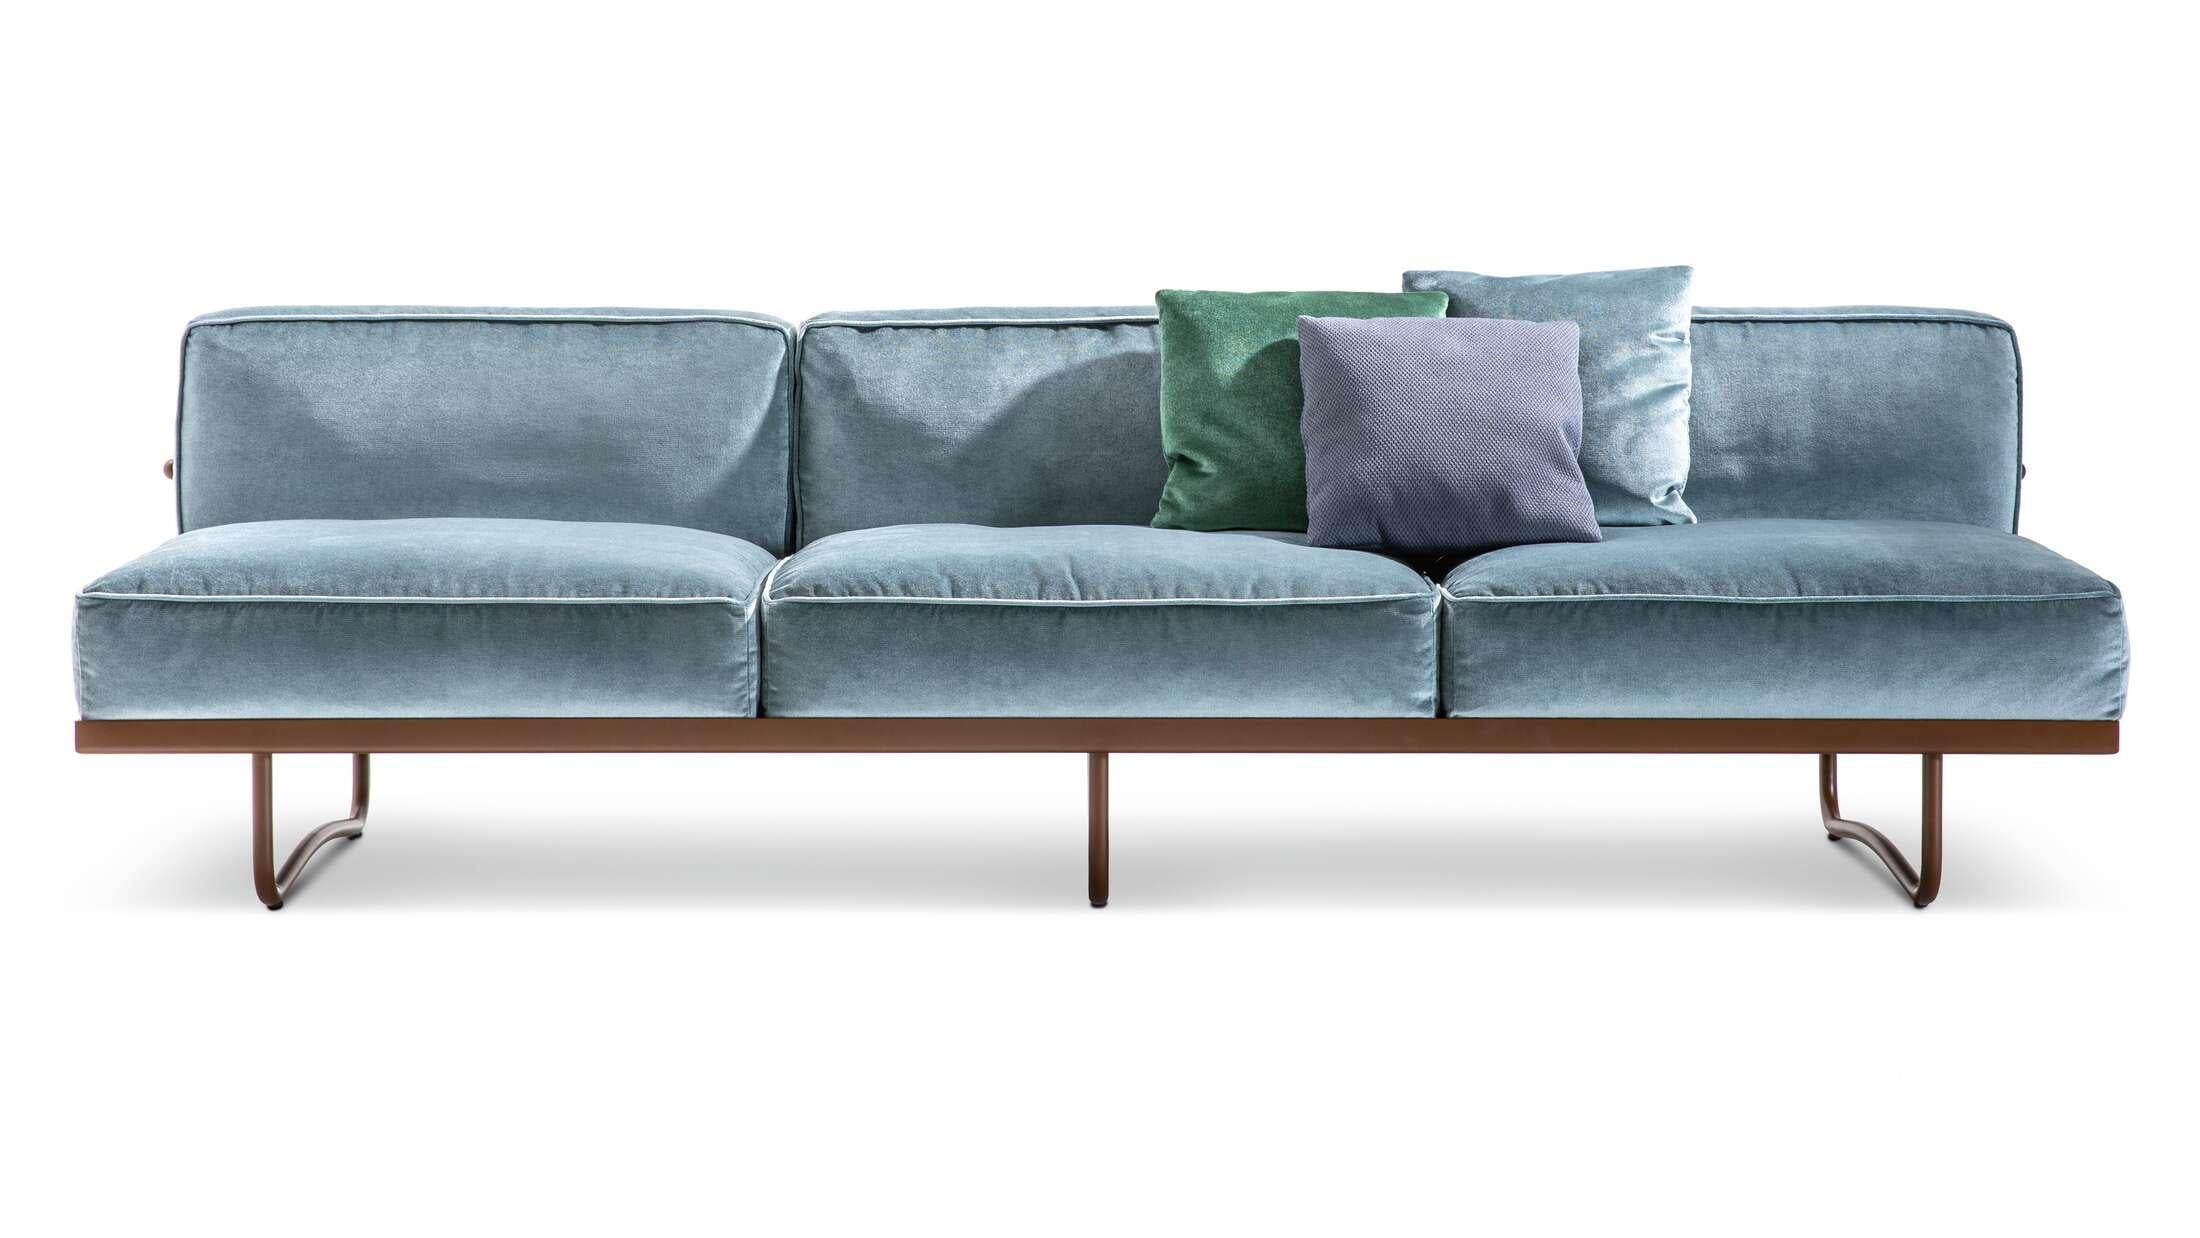 Mid-Century Modern Le Corbusier 5 Canapé Sofa in Black or Petrol for Cassina, Italy - New  For Sale